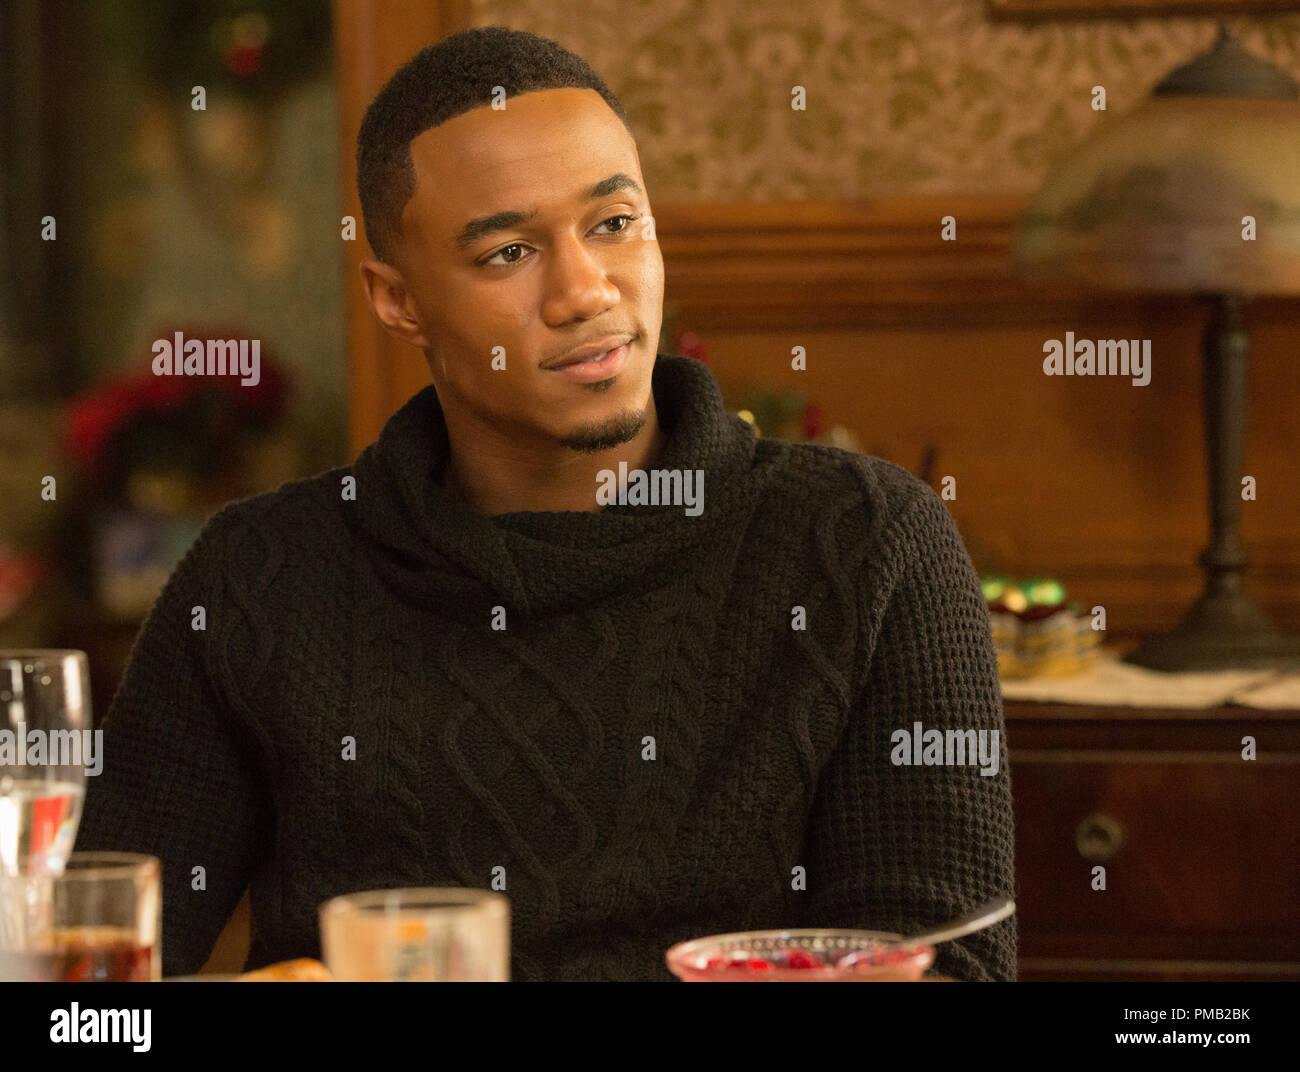 JESSIE T. USHER as Evan in 'Almost Christmas.'  The new comedy from writer/director David E. Talbert and producer Will Packer tells the festive story of a beloved patriarch who asks his family for one gift this holiday season: to get along.  If they can honor that wish and spend five days under the same roof without killing one another, it will be a Christmas miracle. Stock Photo